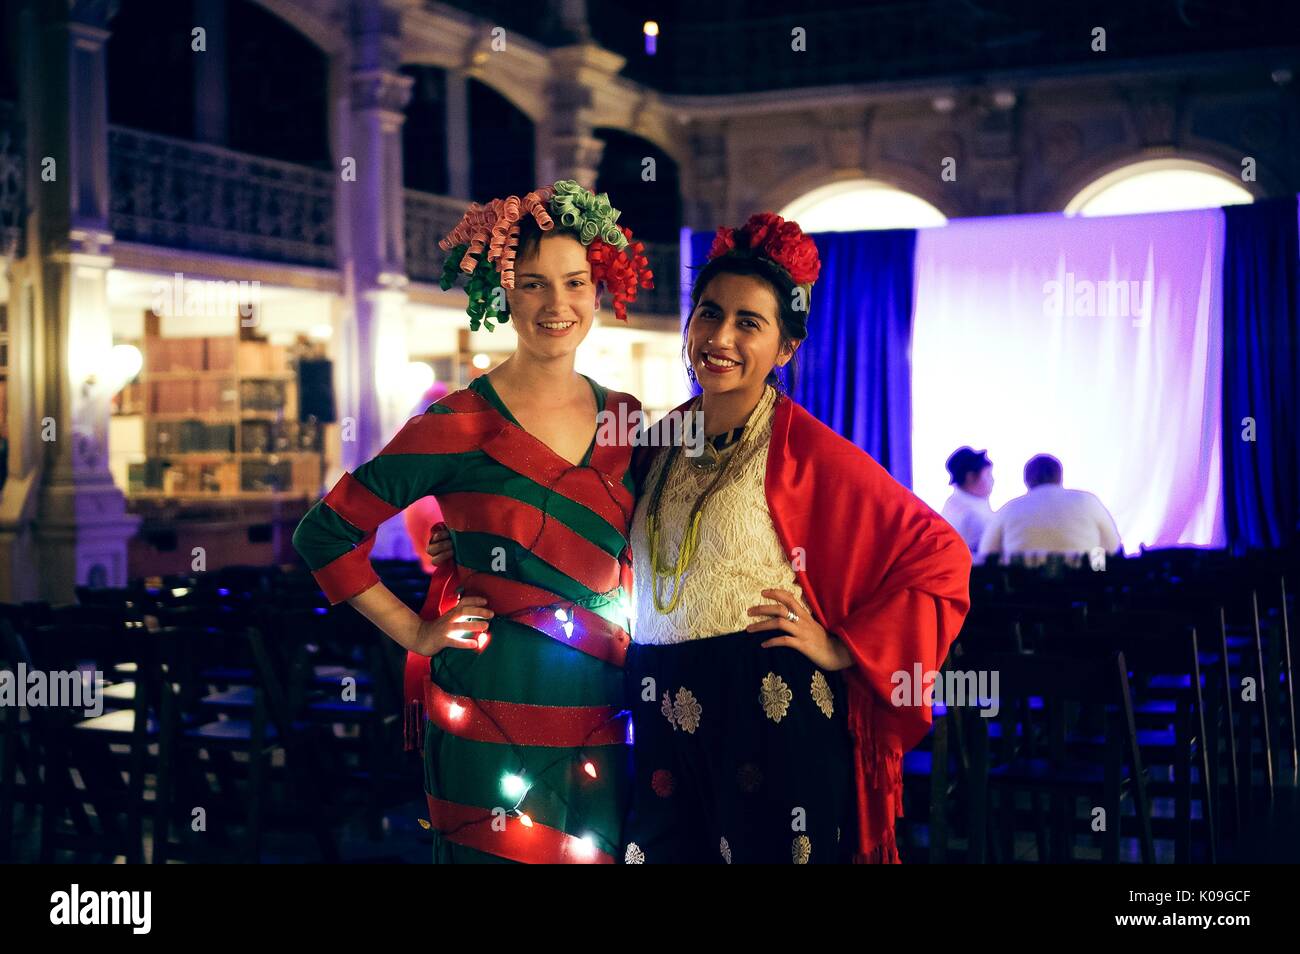 Two female college students pose for a picture, both are in costume, one is wearing a red and green striped outfit and a wig made of ribbons and the other is wearing a red shawl and a red prop in her hair, Halloween at Johns Hopkins University's George Peabody Library, 2015. Courtesy Eric Chen. Stock Photo